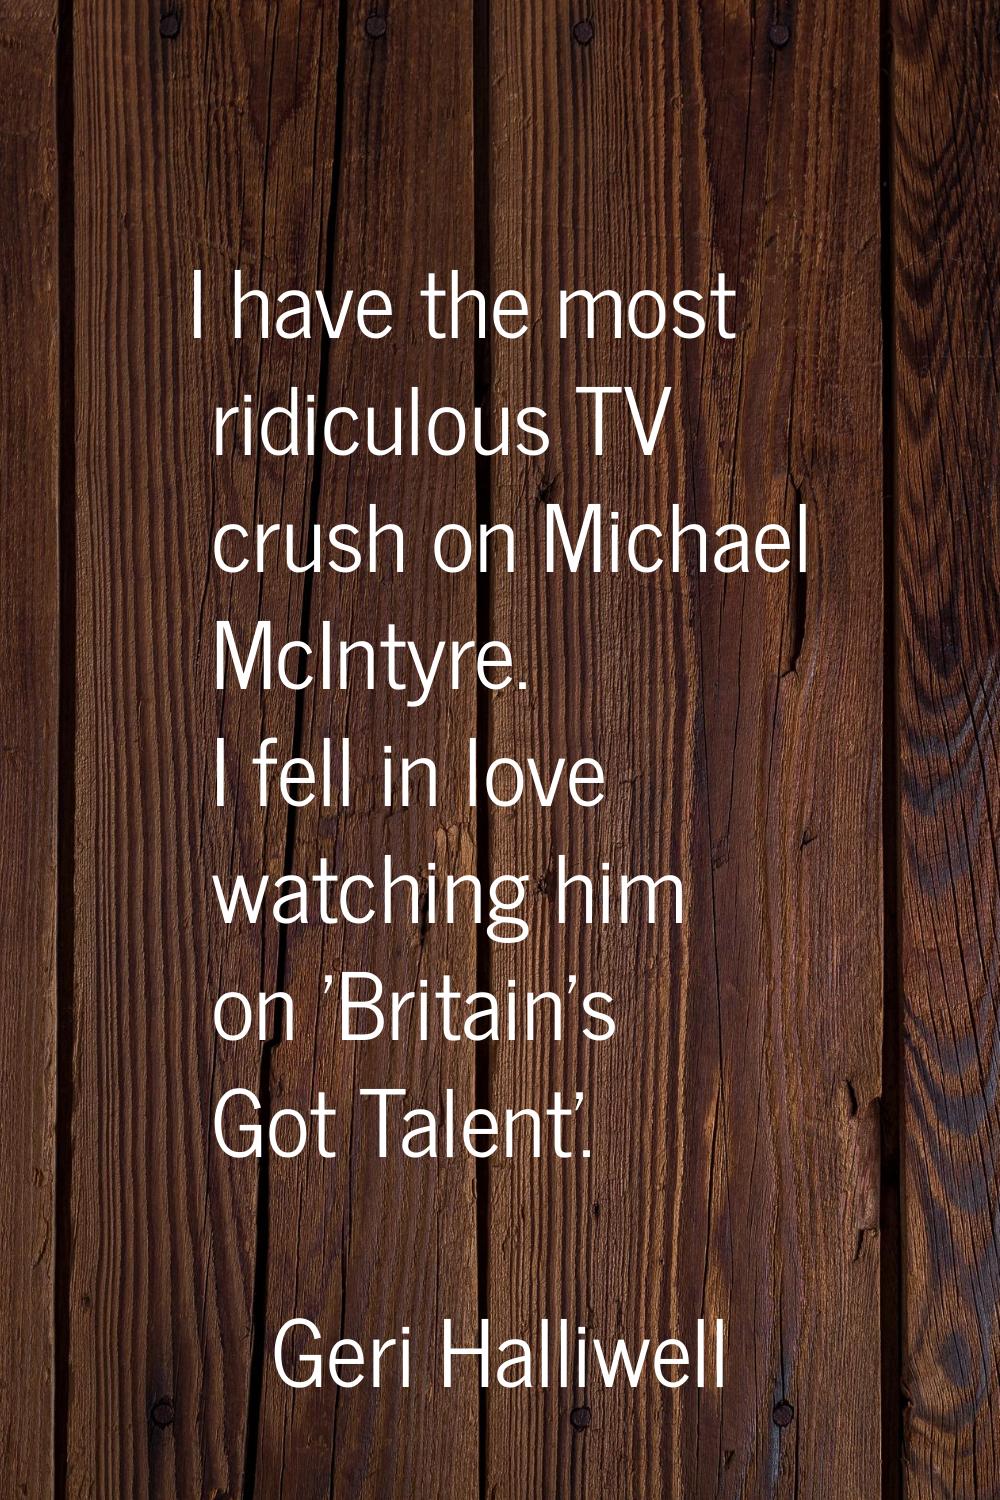 I have the most ridiculous TV crush on Michael McIntyre. I fell in love watching him on 'Britain's 